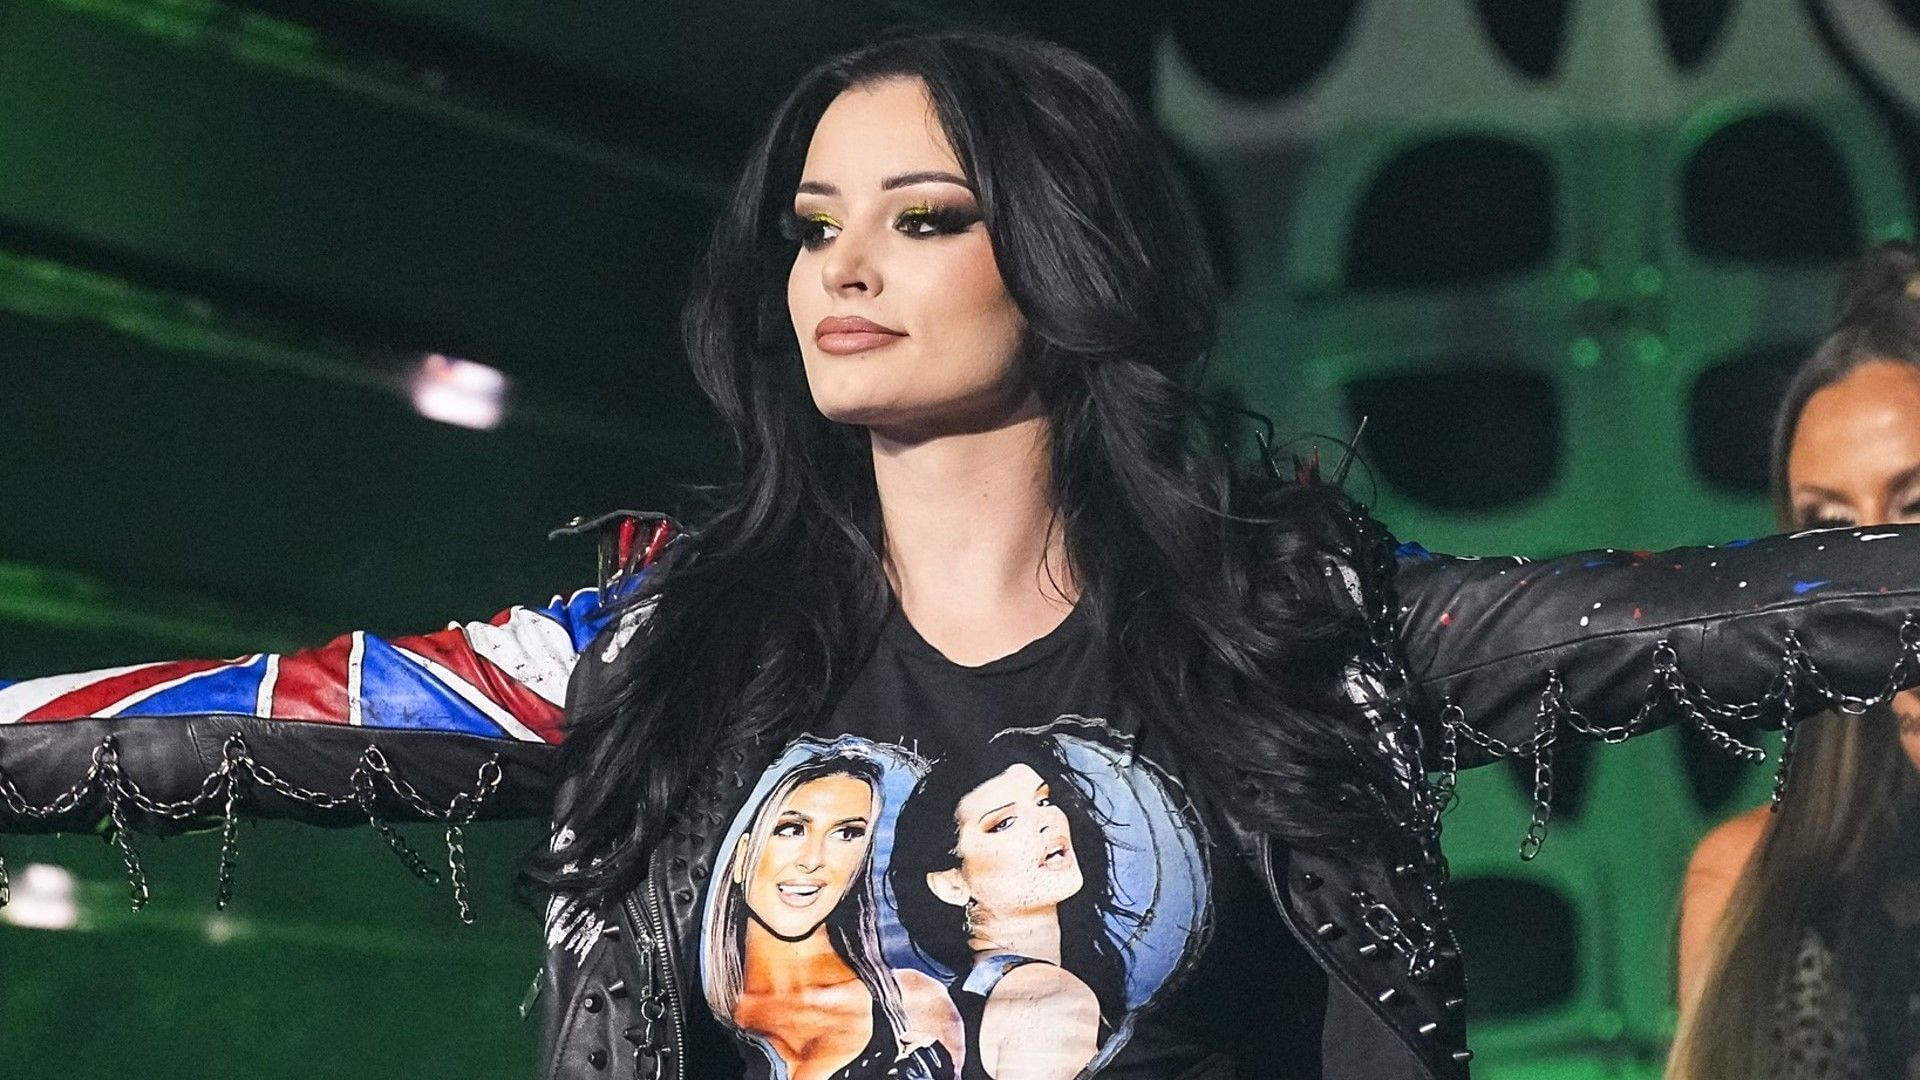 Saraya makes her way to the ring on AEW Dynamite